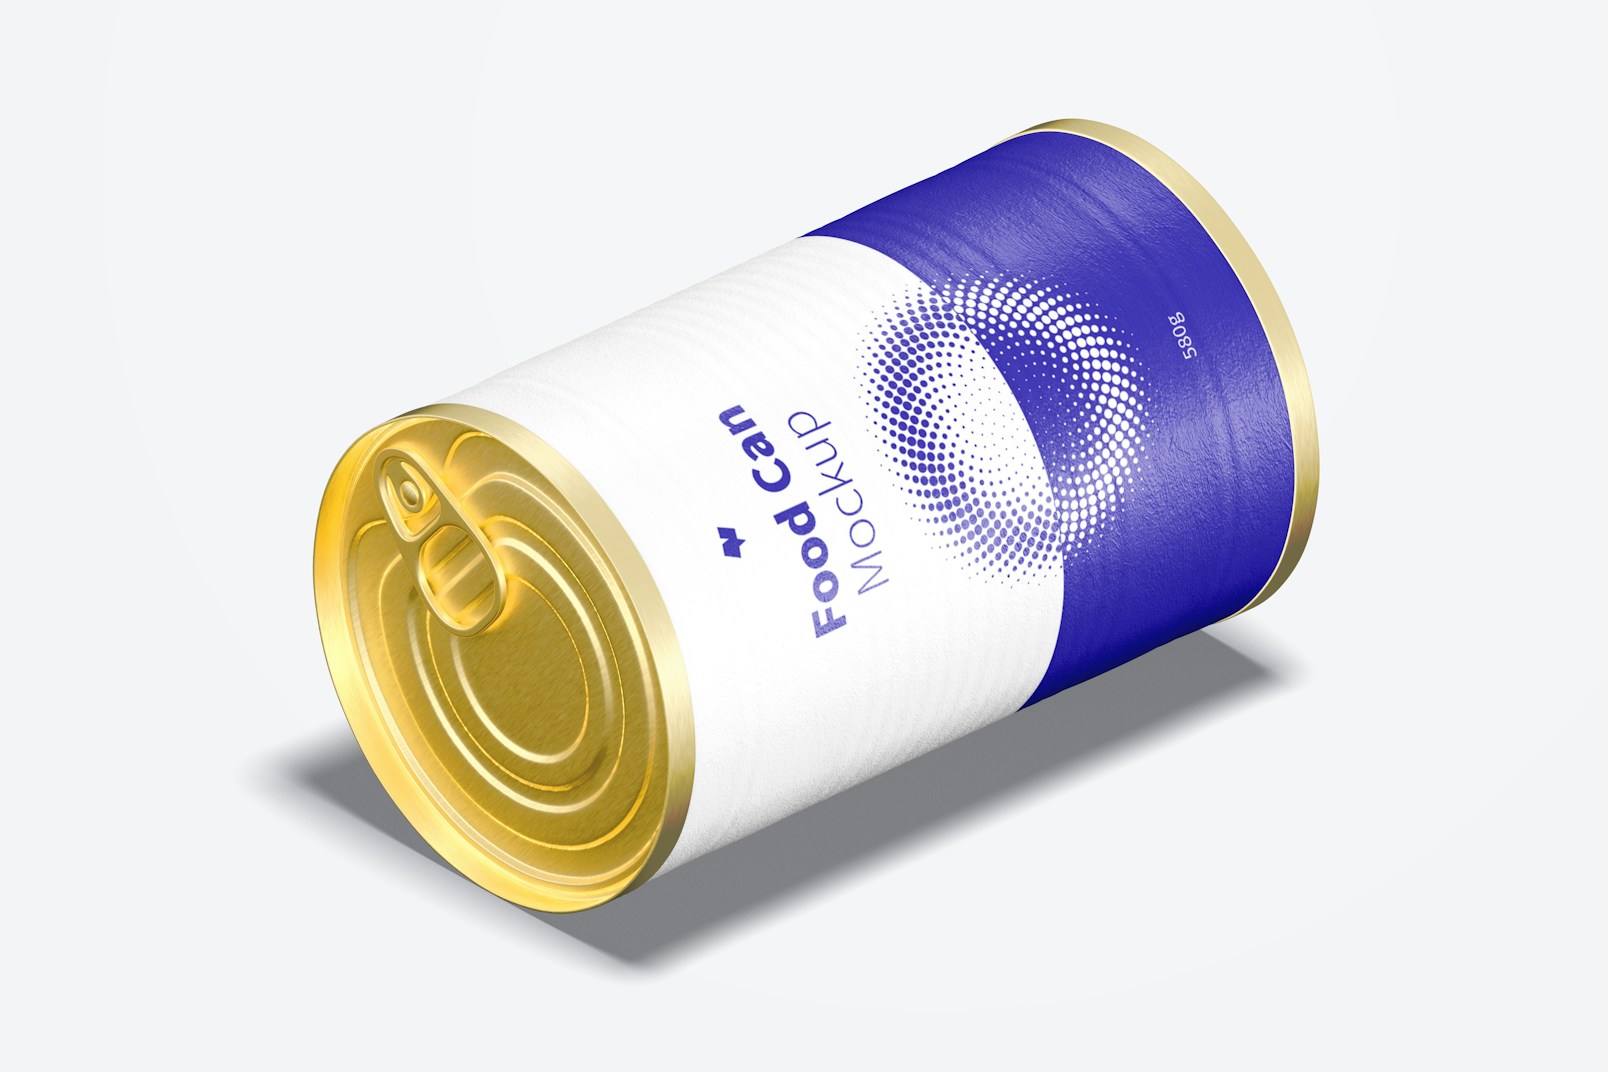 580g Food Can Mockup, Isometric Left View